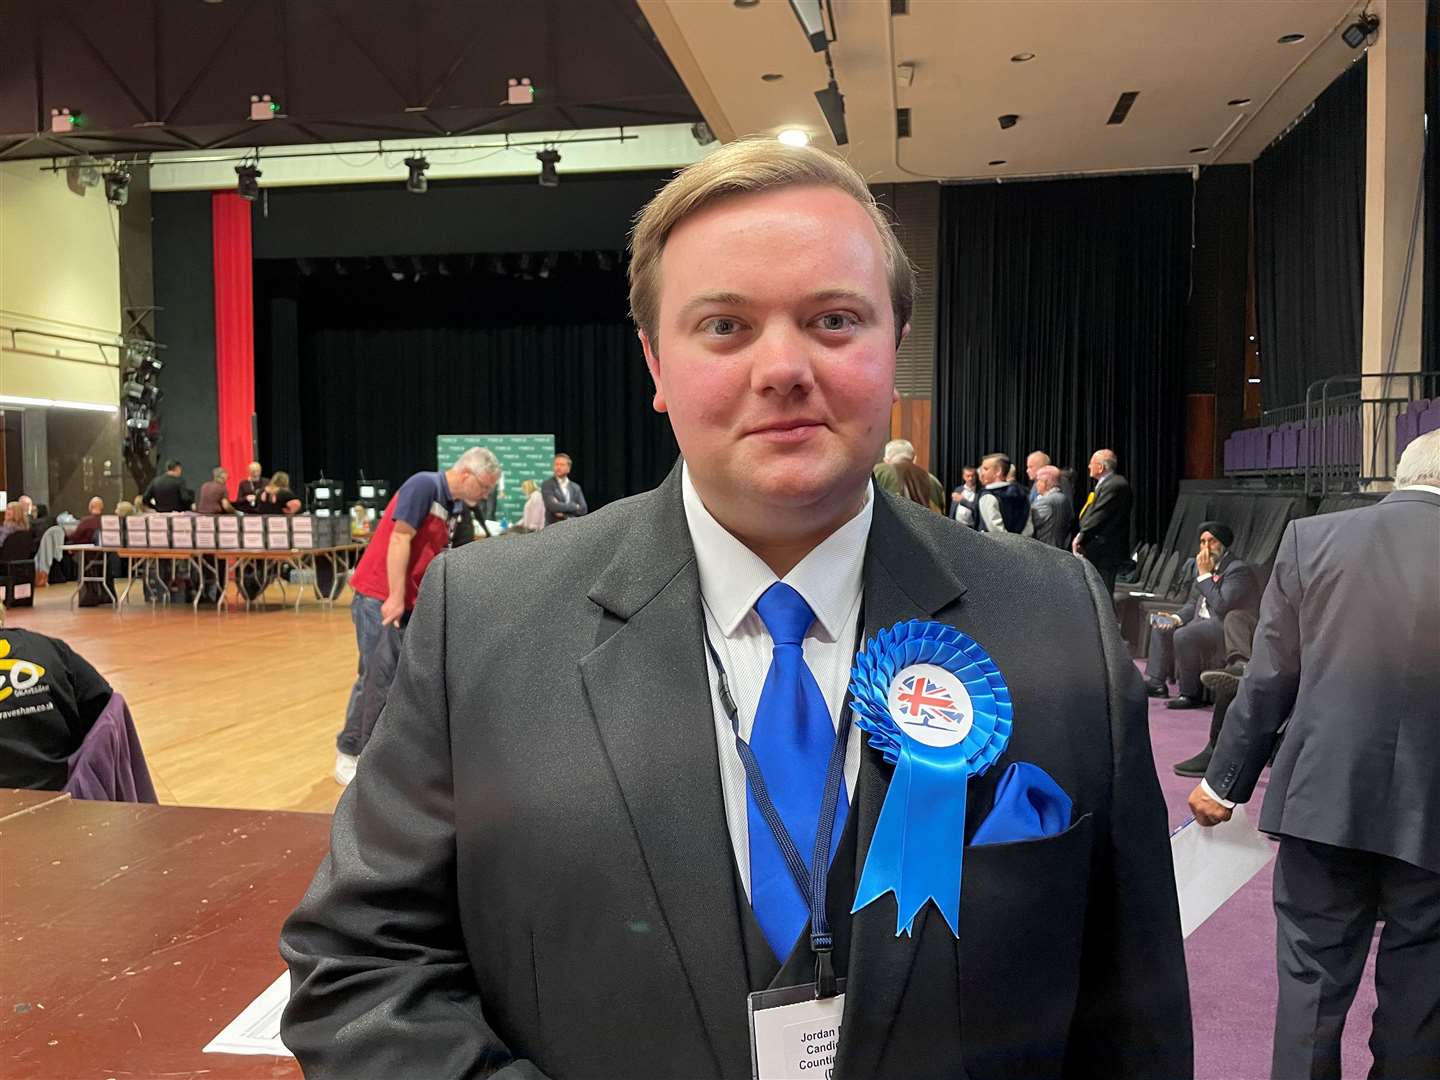 Leader of the opposition Cllr Jordan Meade retained his seat